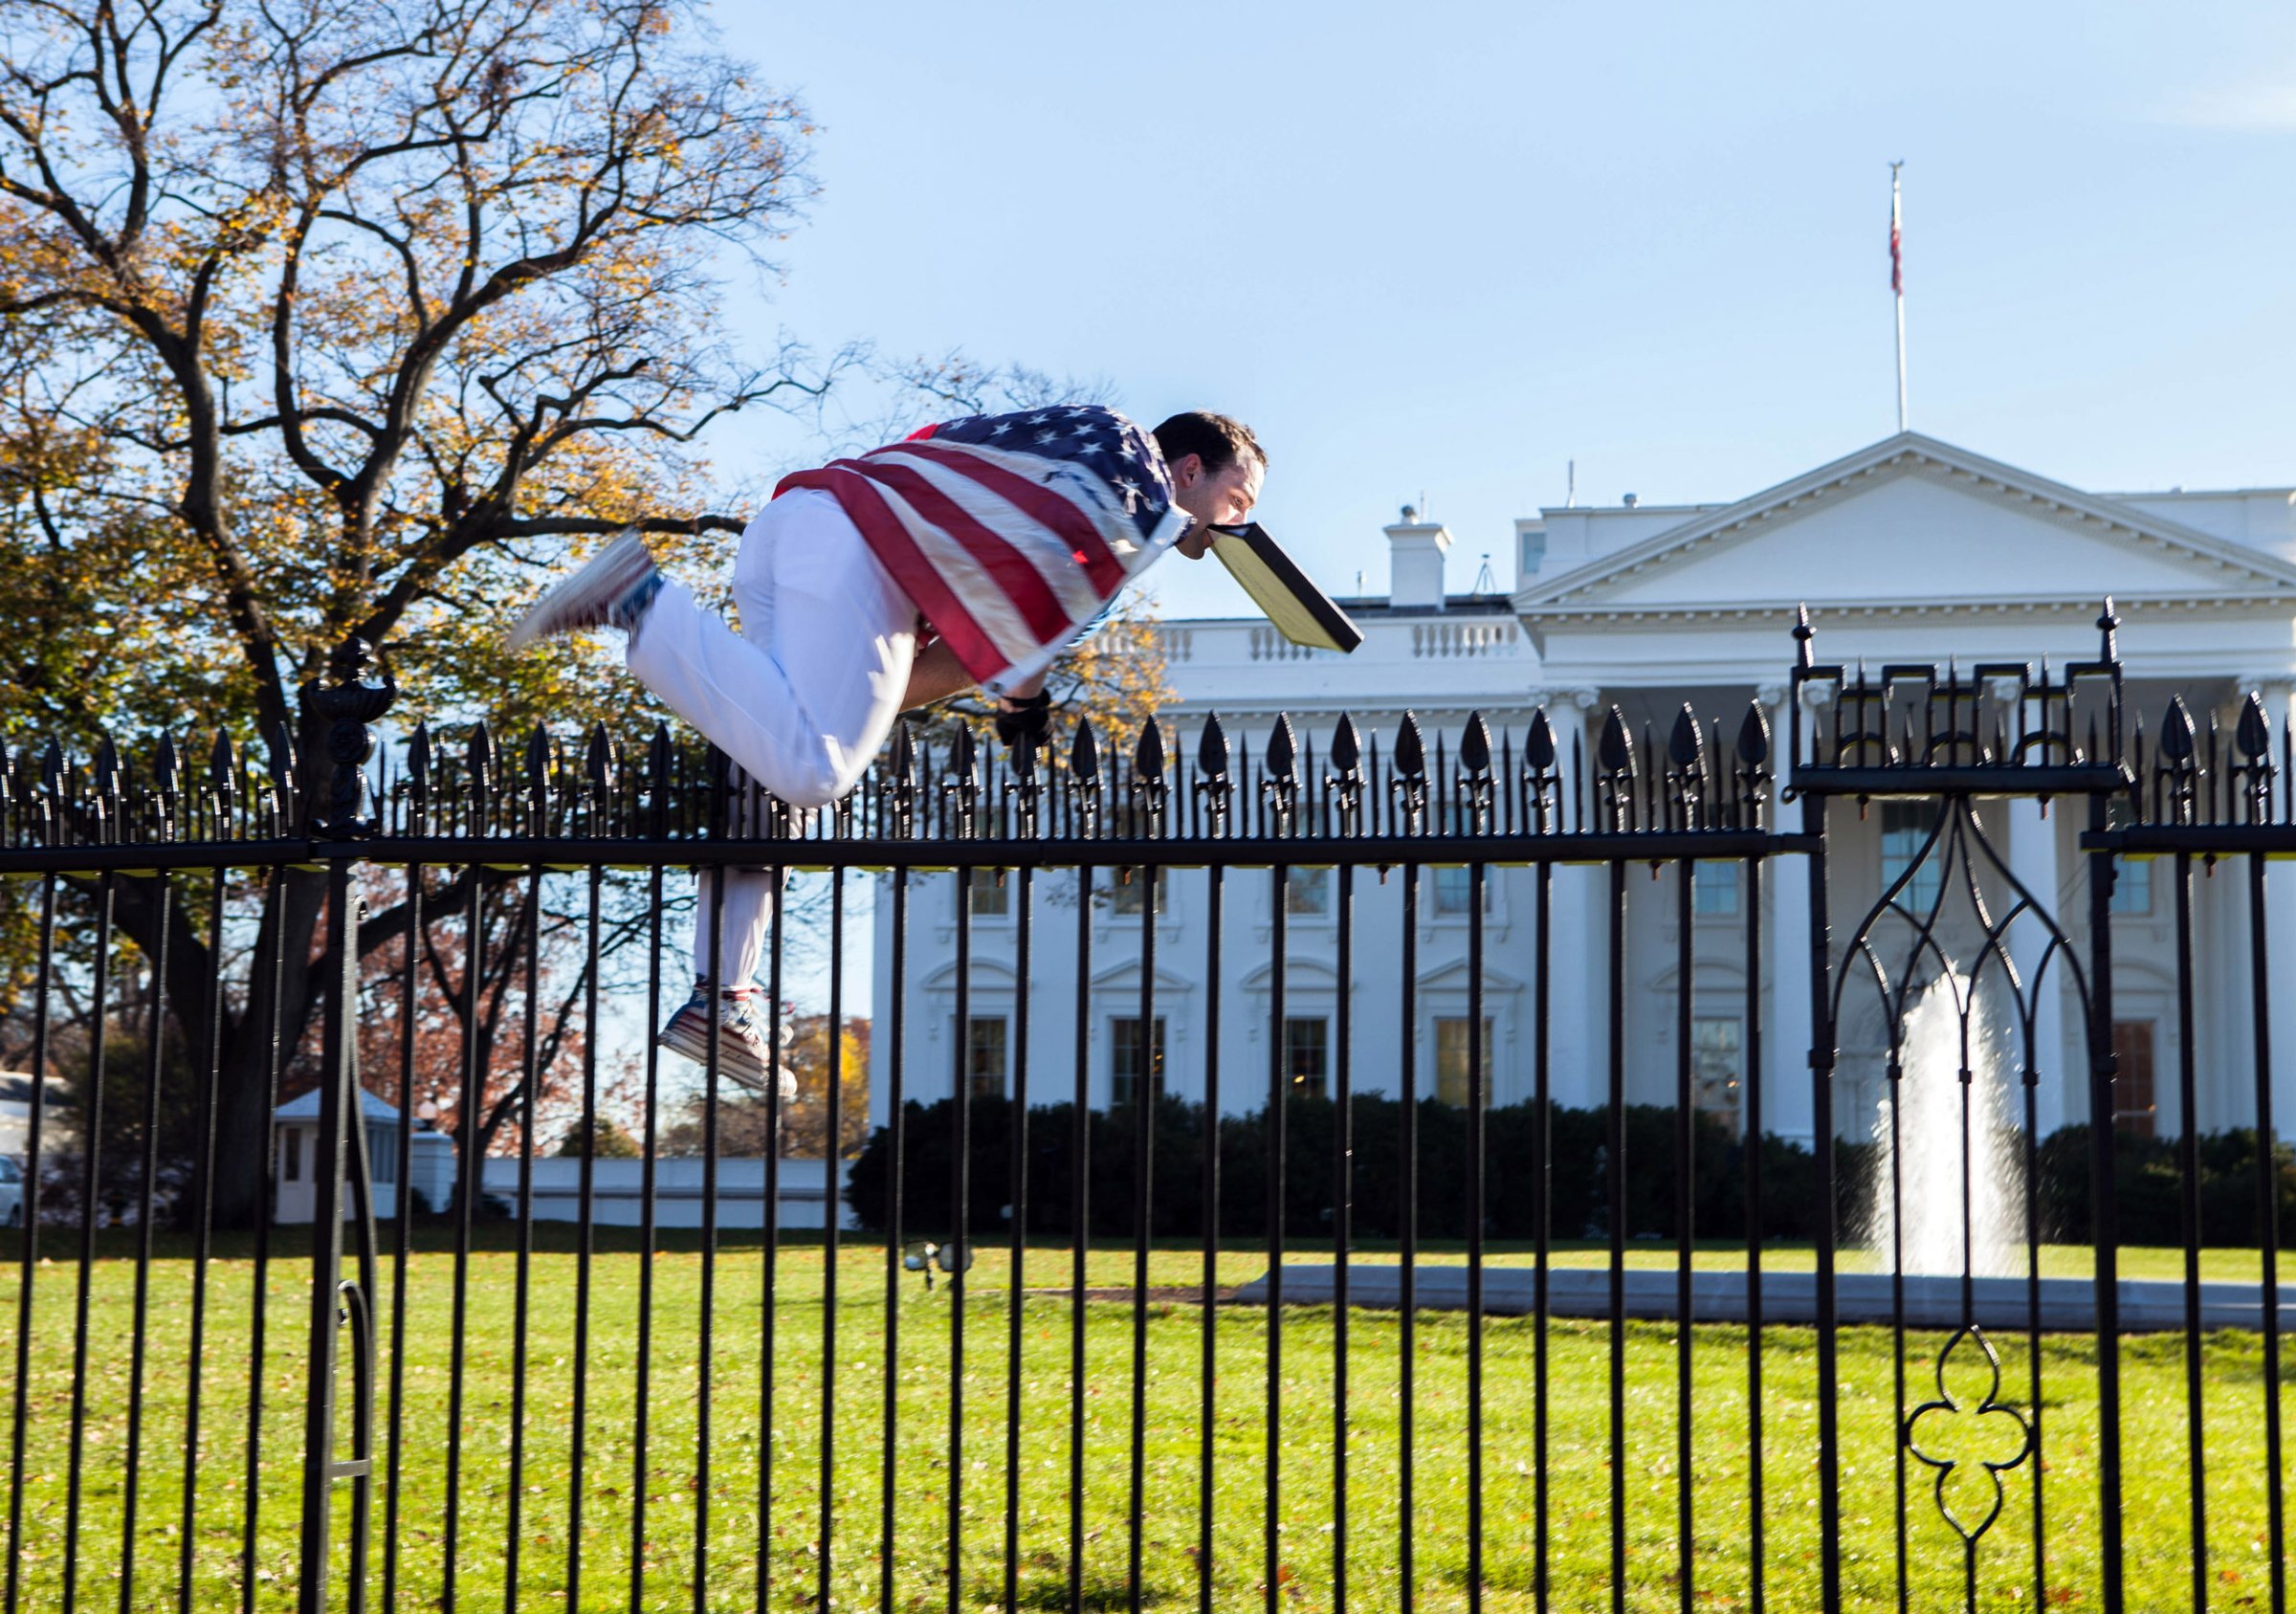 In this photo provided by Vanessa Pena, a man jumps a fence at the White House on Thursday, Nov. 26, 2015, in Washington. The man was immediately apprehended and taken into custody pending criminal charges, the Secret Service said. President Barack Obama and his wife and daughters were spending Thanksgiving the holiday at the White House. (Vanessa Pena via AP) MANDATORY CREDIT